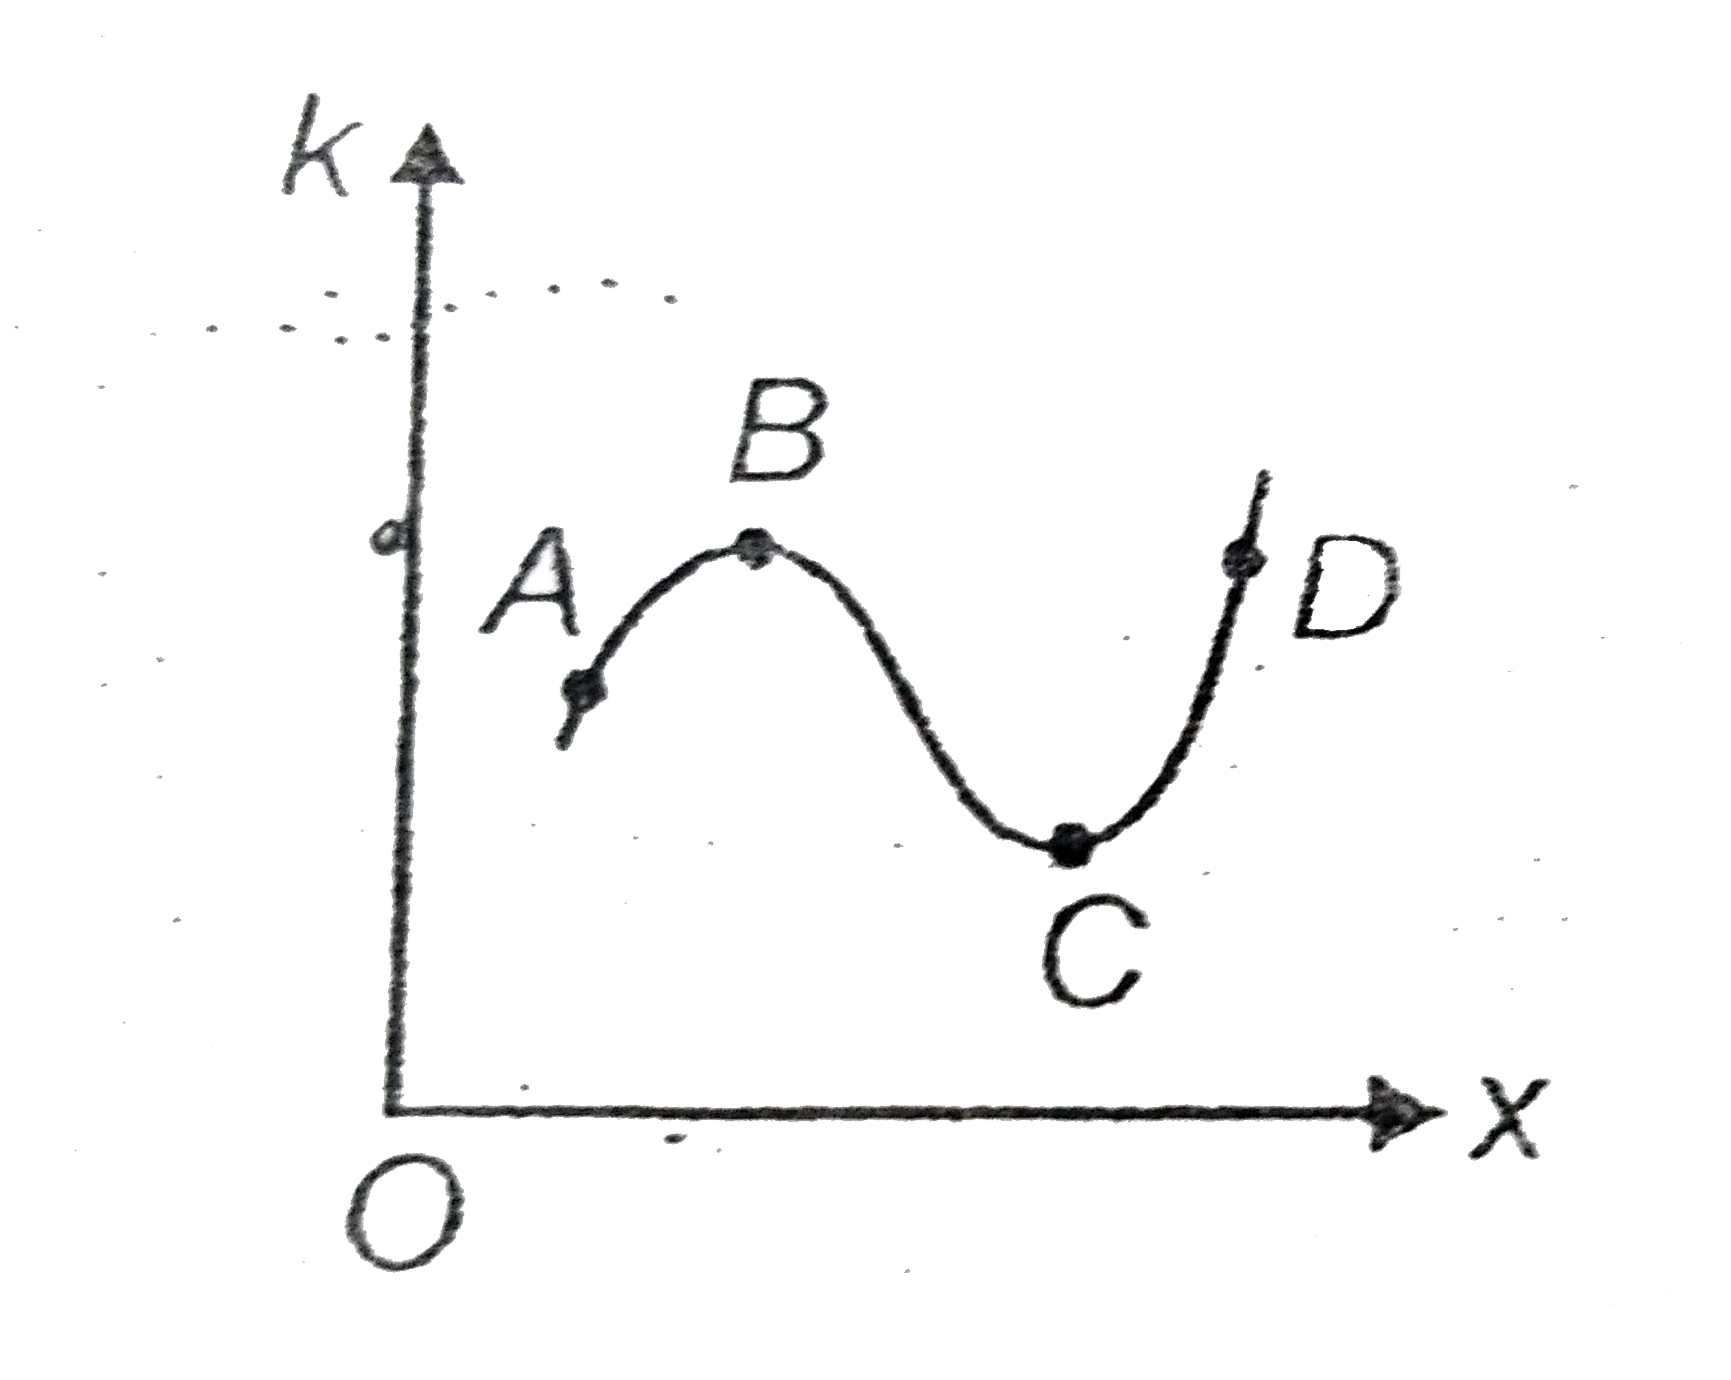 For a particle moving under the action of a variable force, kinetic energy (k) versus position (x) graph is given, then